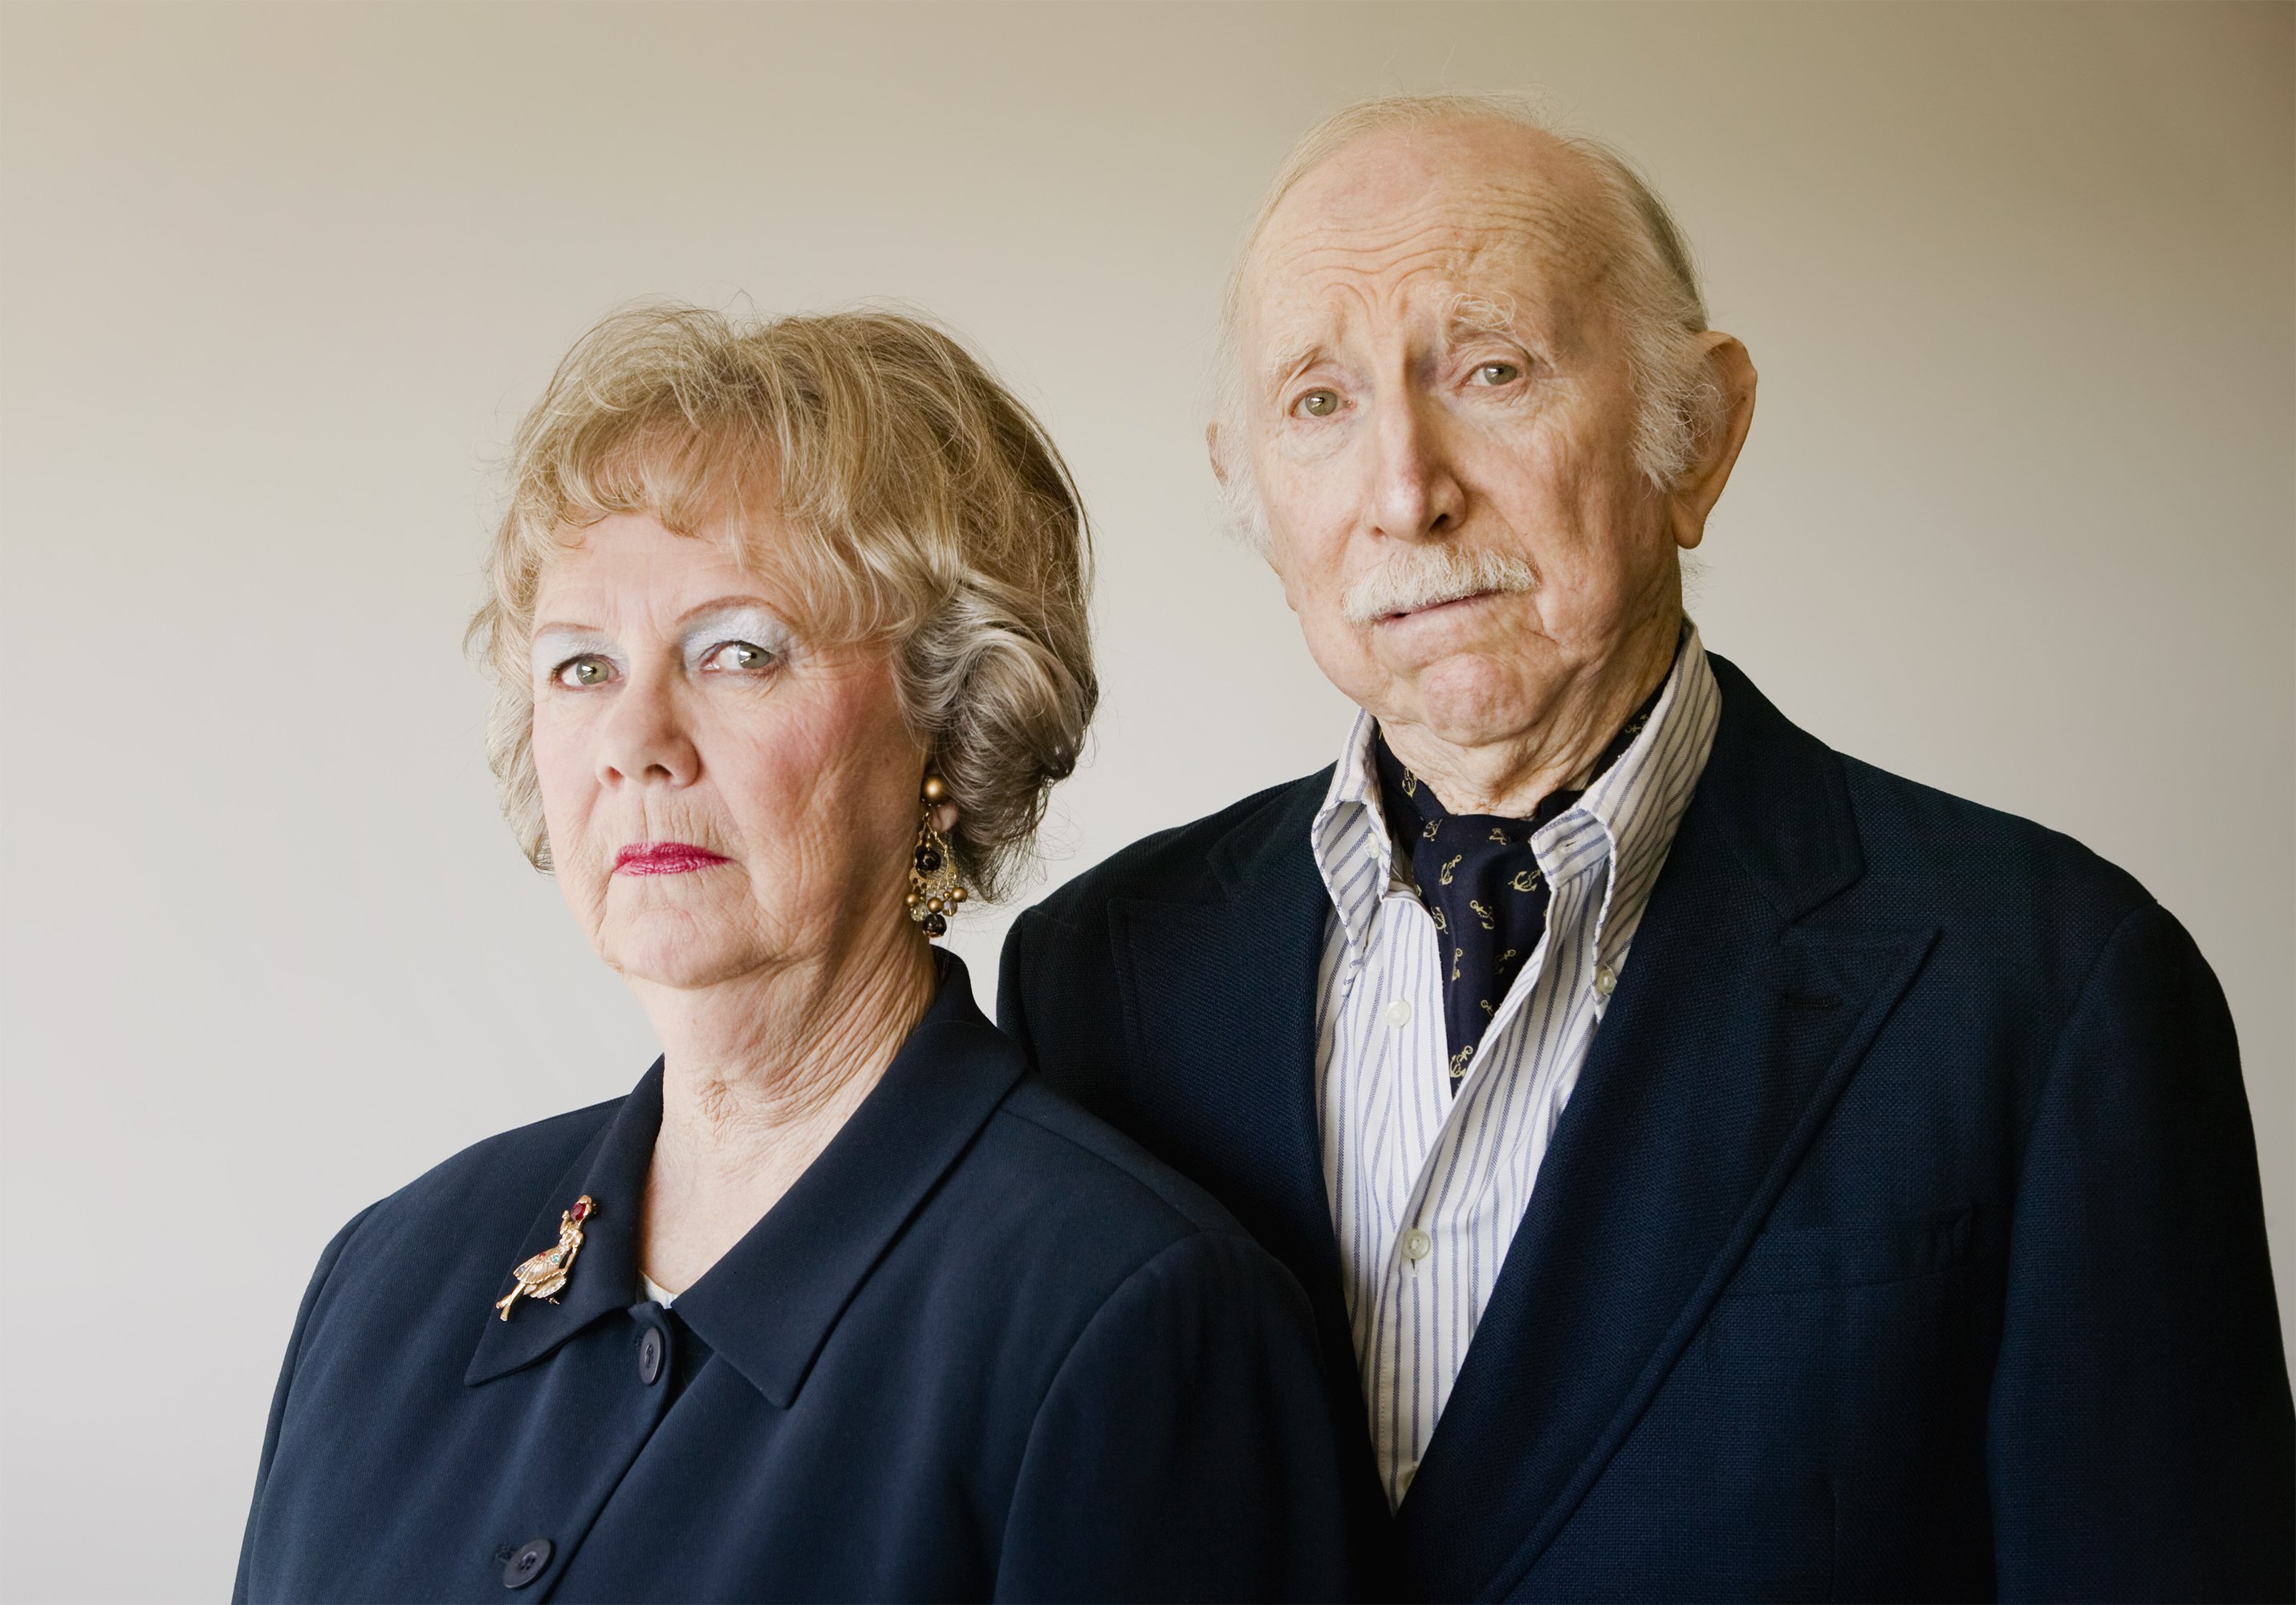 Angry grandparents neatly dressed. | Source: Shutterstock.